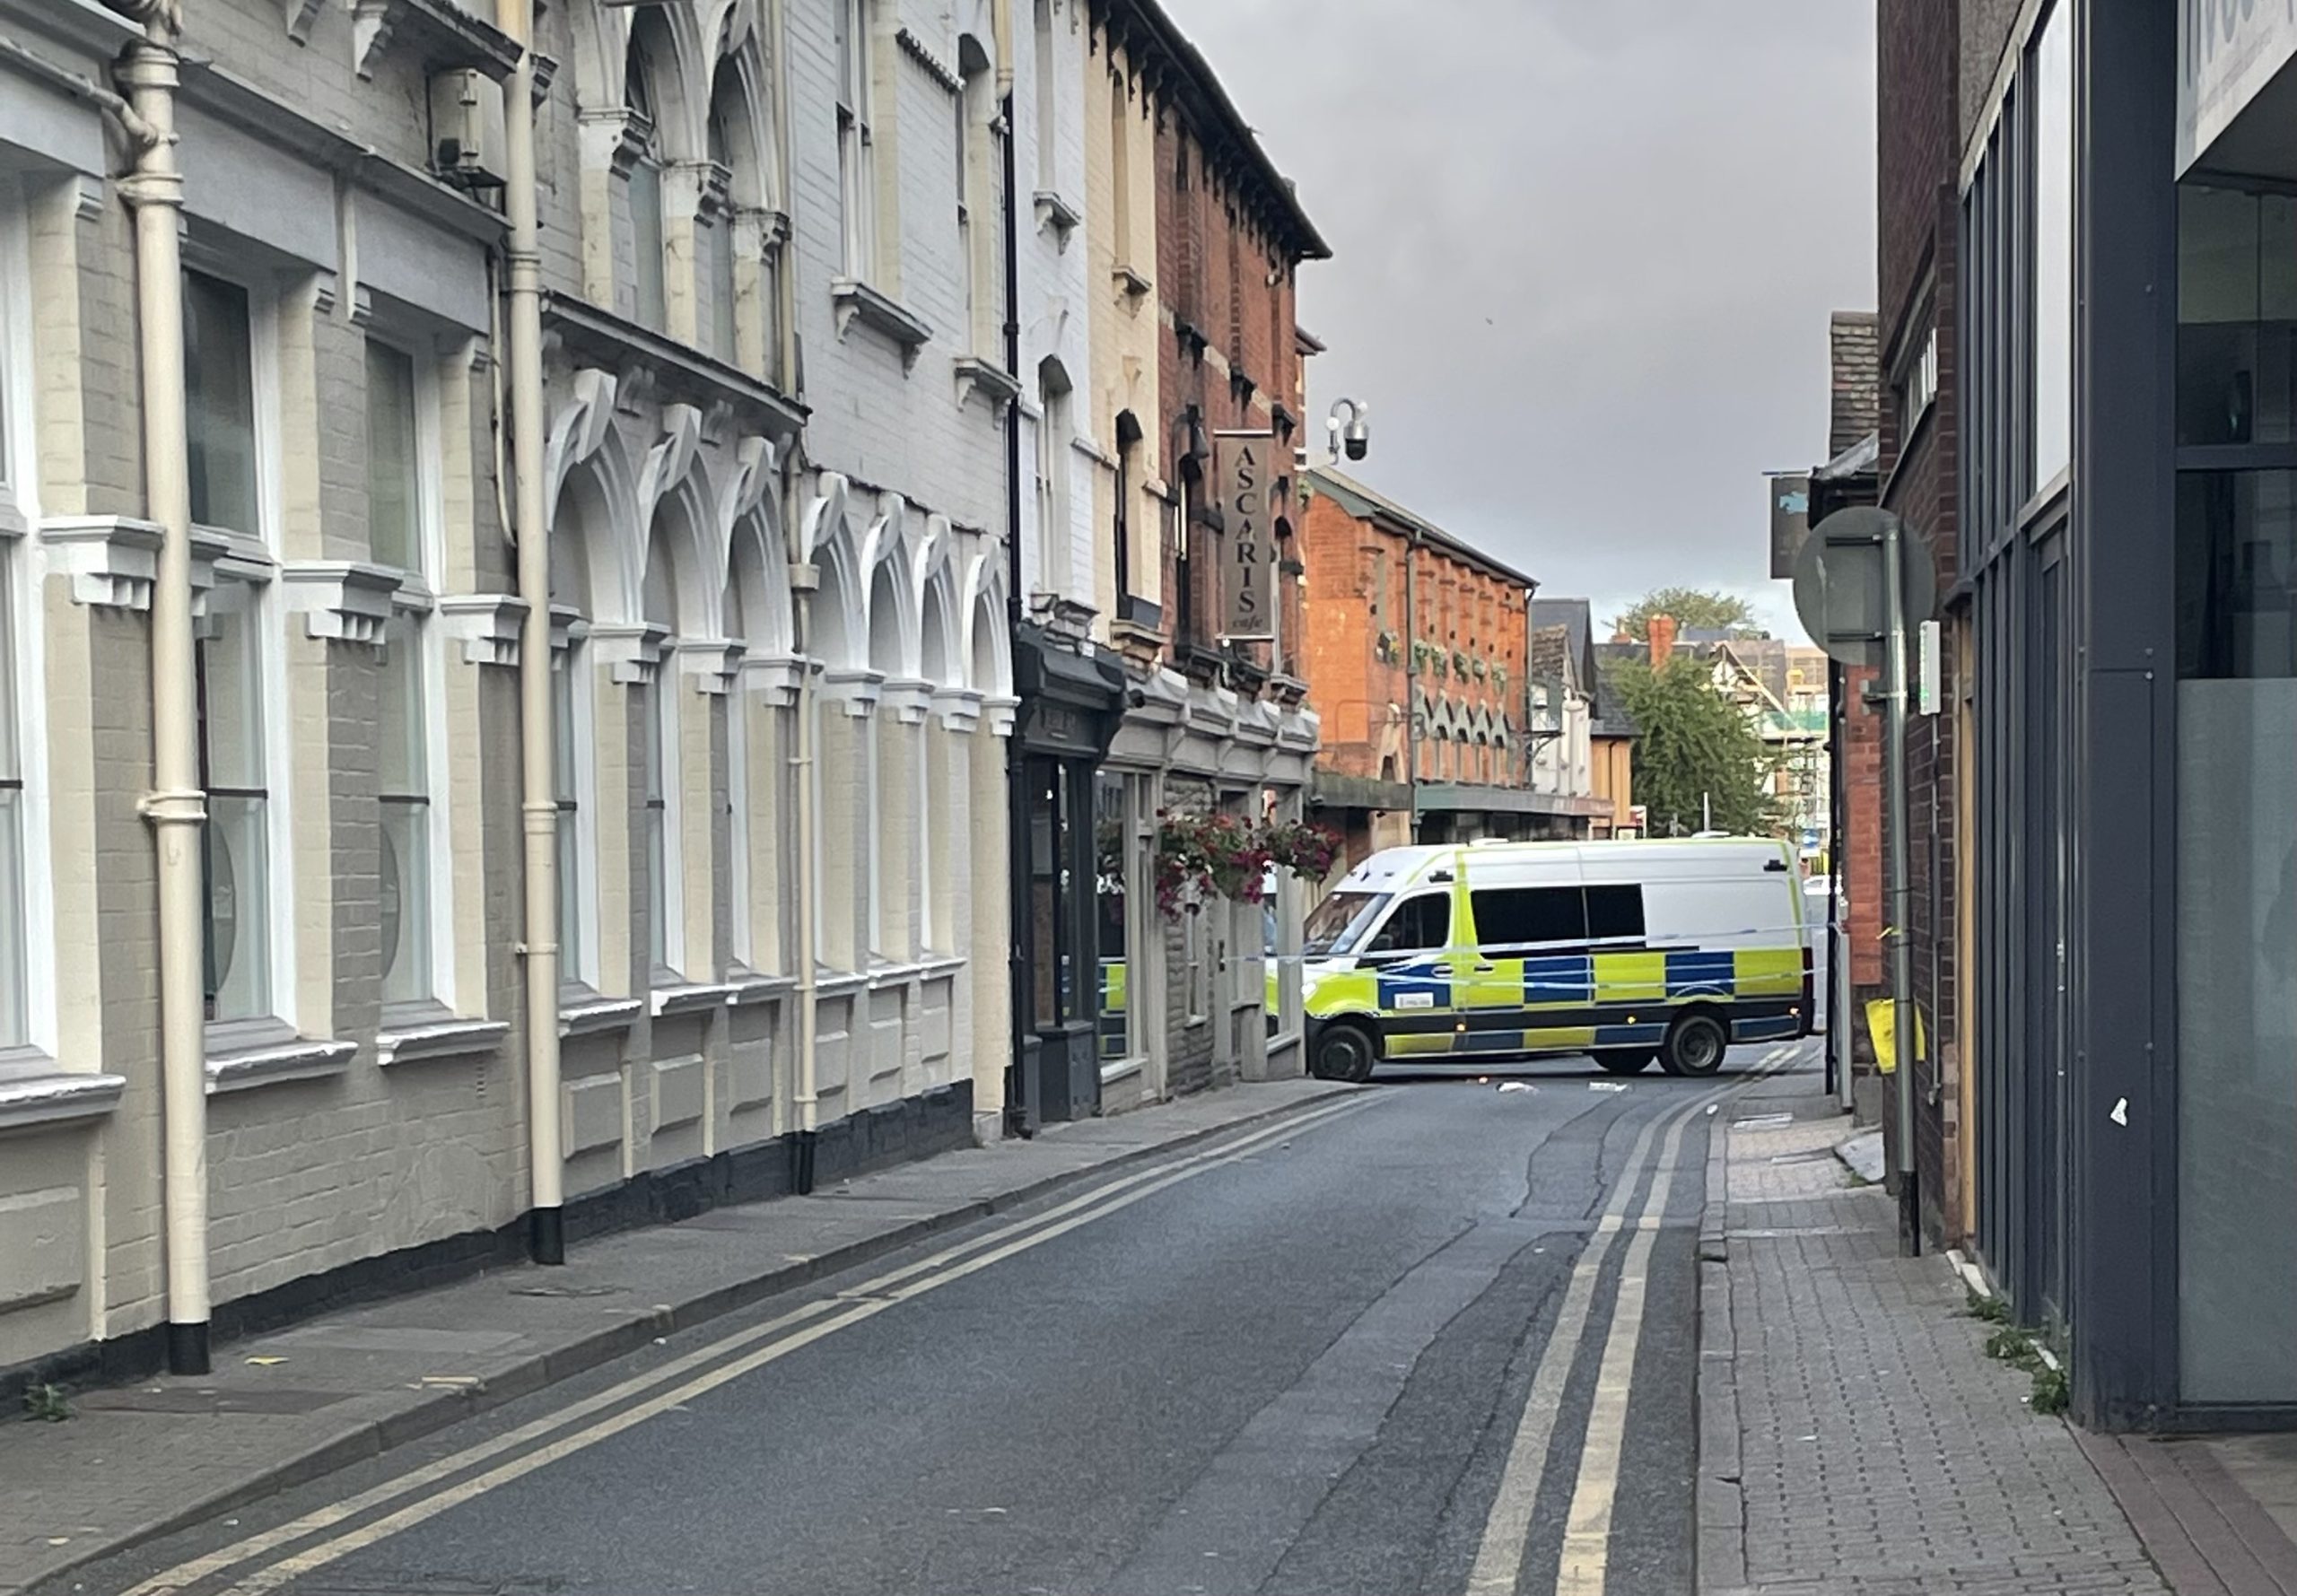 BREAKING | City centre street cordoned off by Police following incident overnight in Hereford 